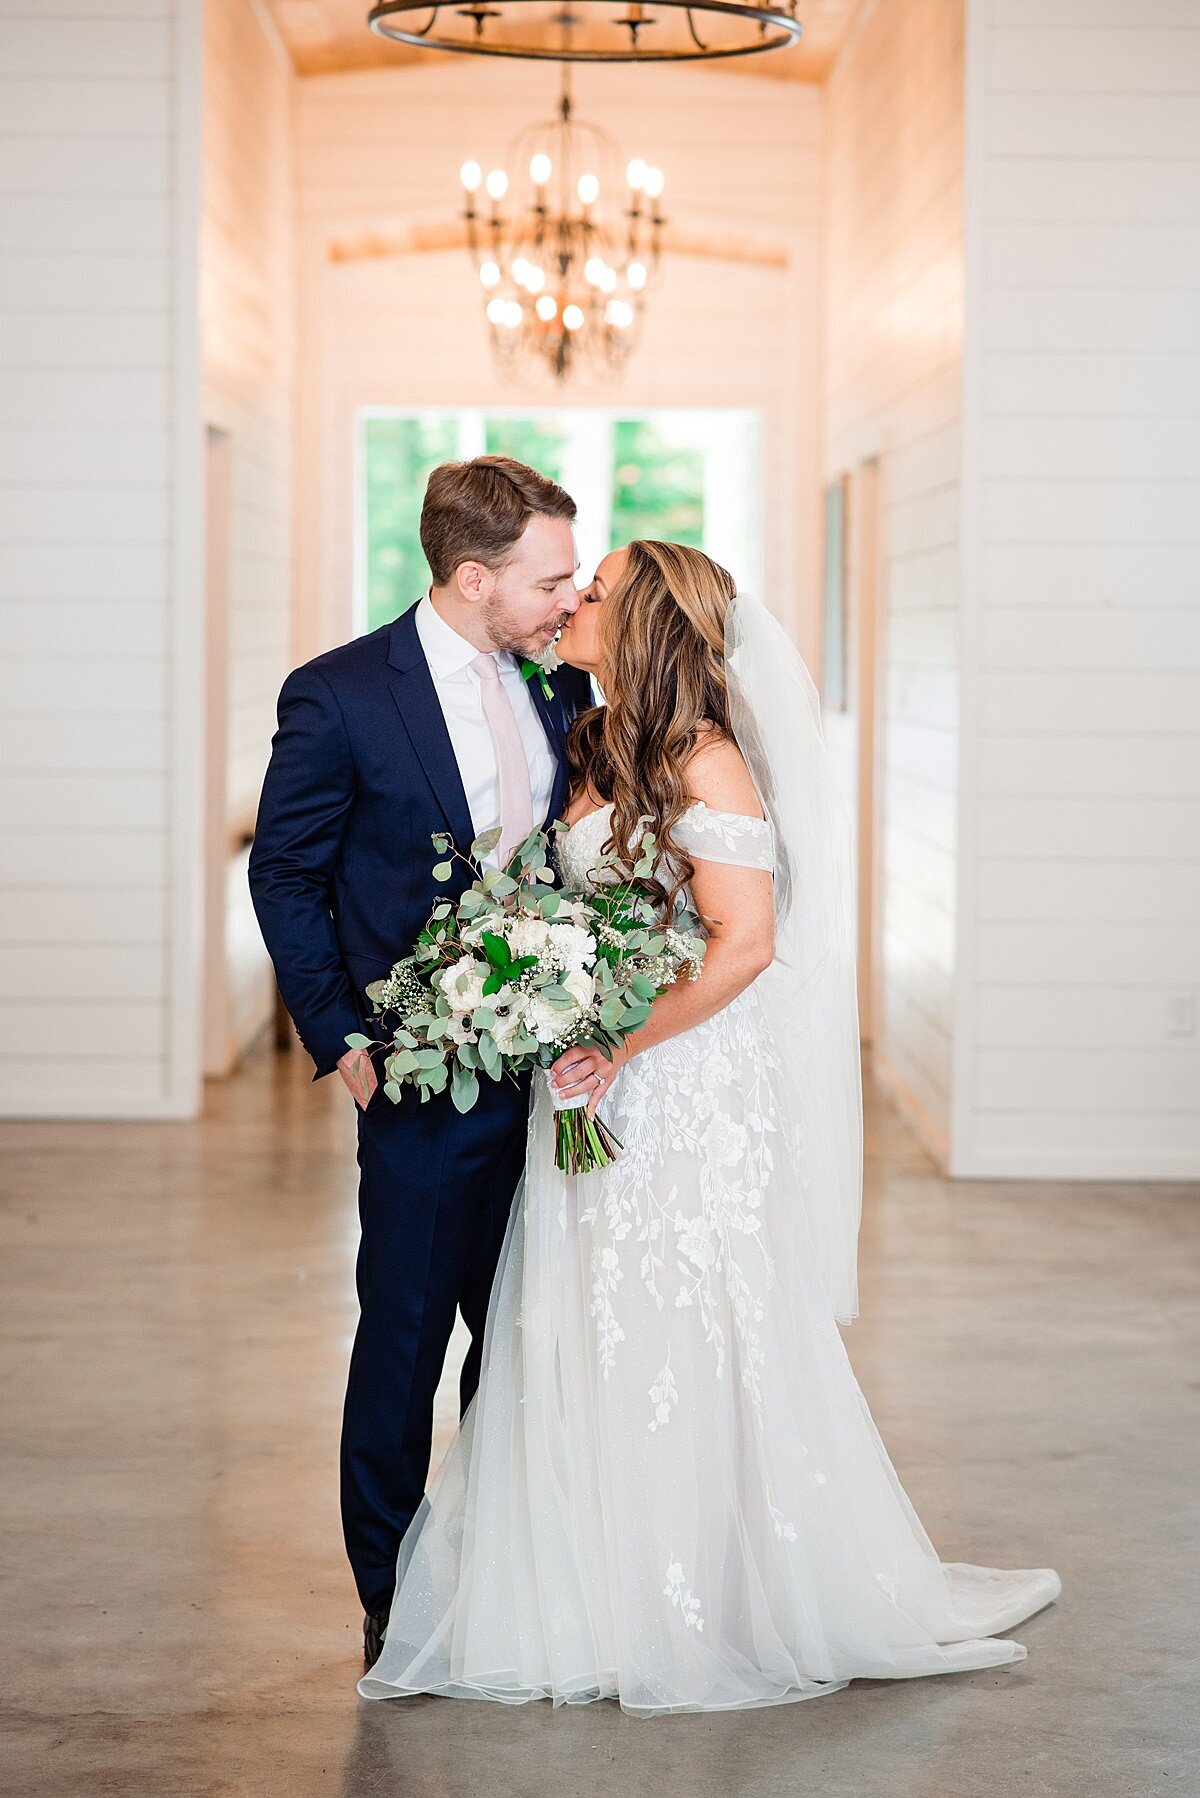 The bride and groom kiss in a large white room with a polished wood floor and a brass chandelier hanging above the open door behind them. The bride is wearing a long sheer veil and an off the shoulder wedding dress with a fitted lace bodice and full flowing sheer skirt with lace details. She is holding a large bouquet of white flowers and greenery. The groom has one arm around the bride's waist and the other hand in is pocket. The groom is wearing a navy suit with a white shirt and blush tie.